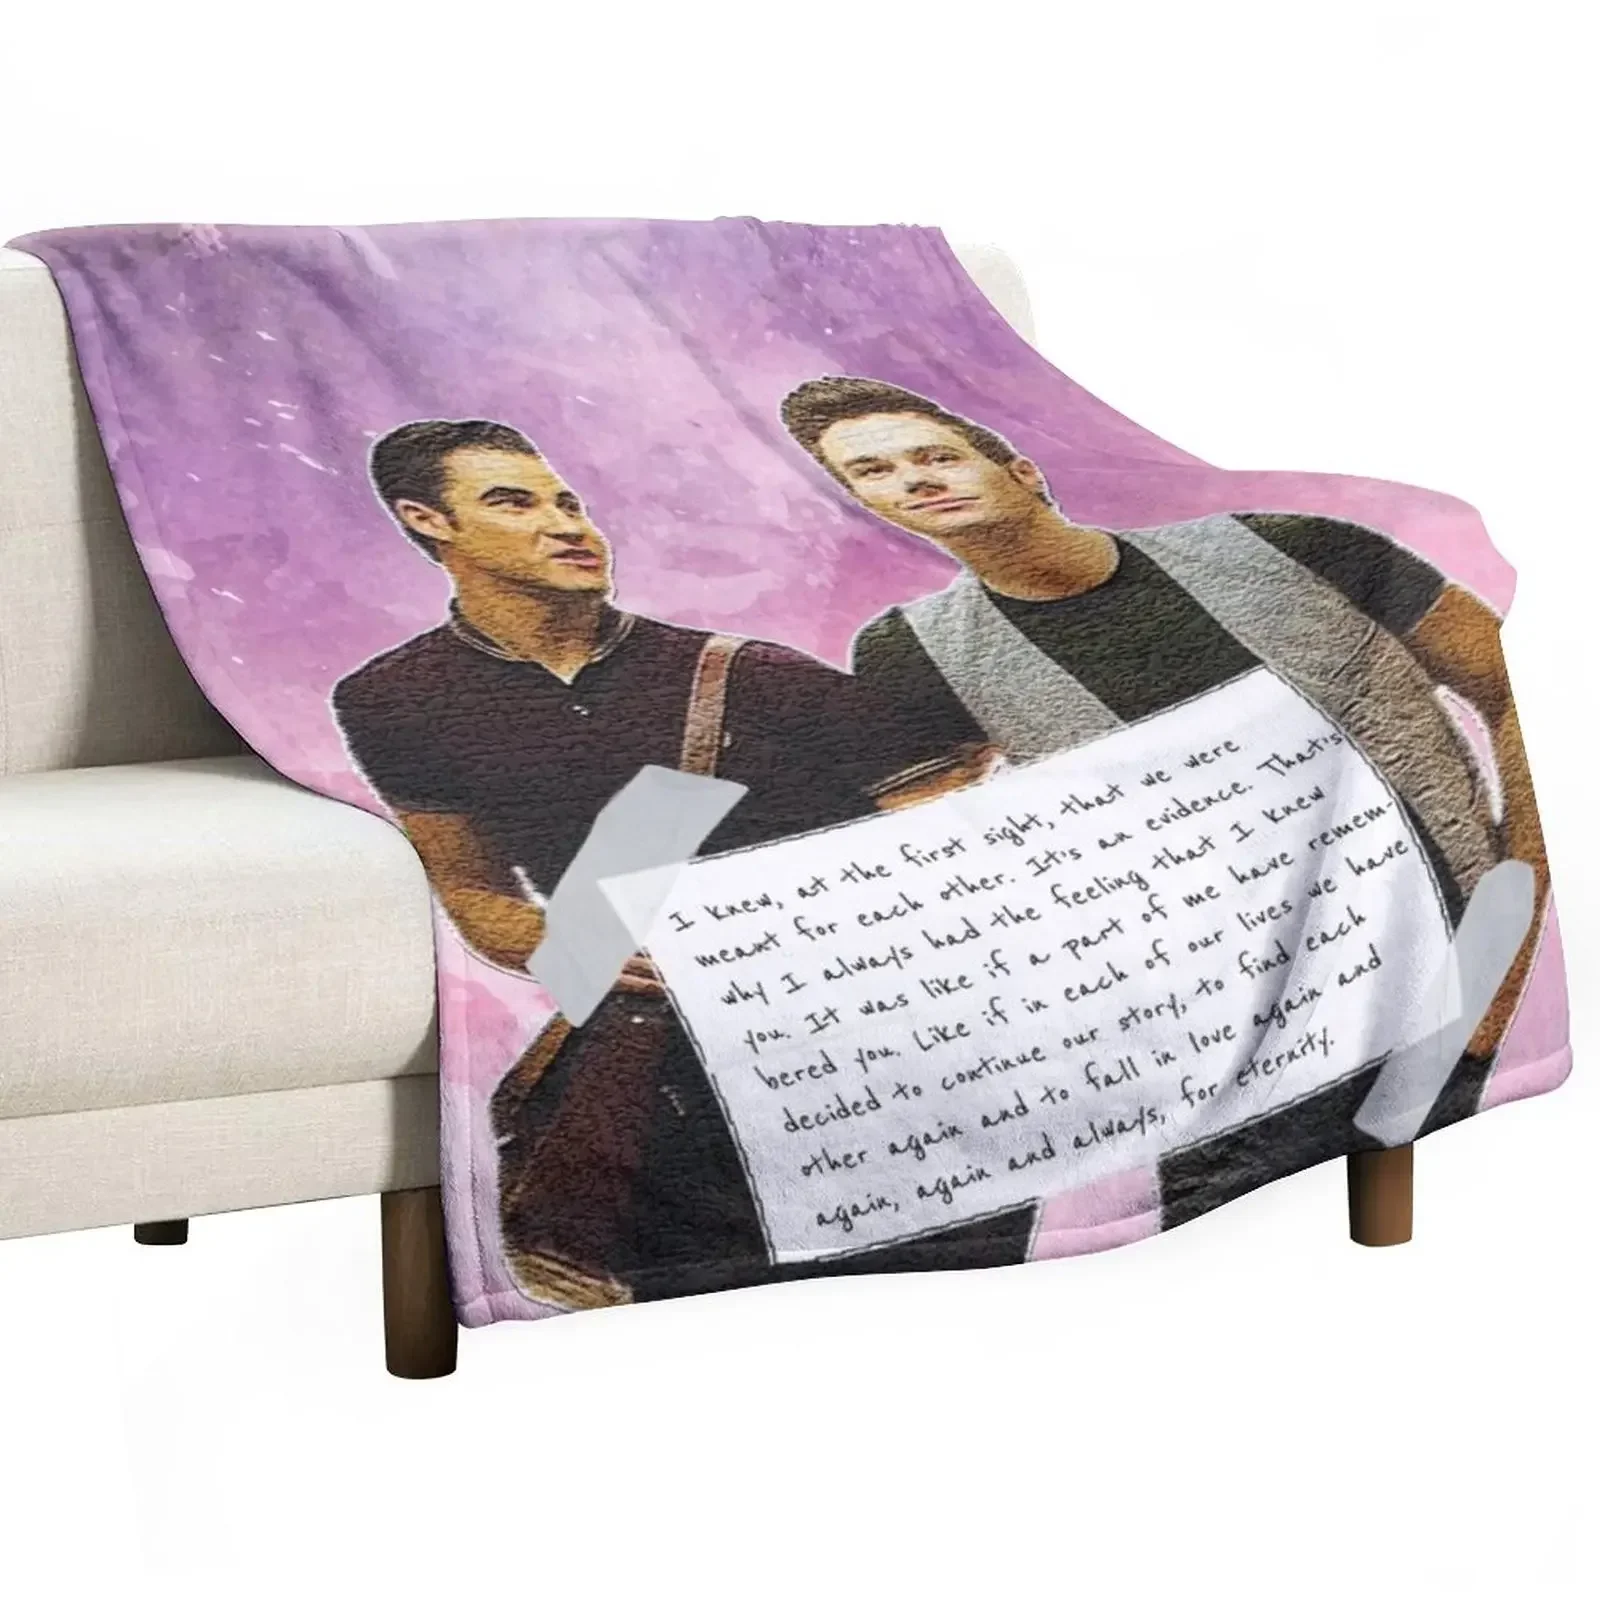 

Glee Klaine Watercolour Throw Blanket Thermals For Travel Bed Fashionable blankets ands Fluffy Shaggy Blankets